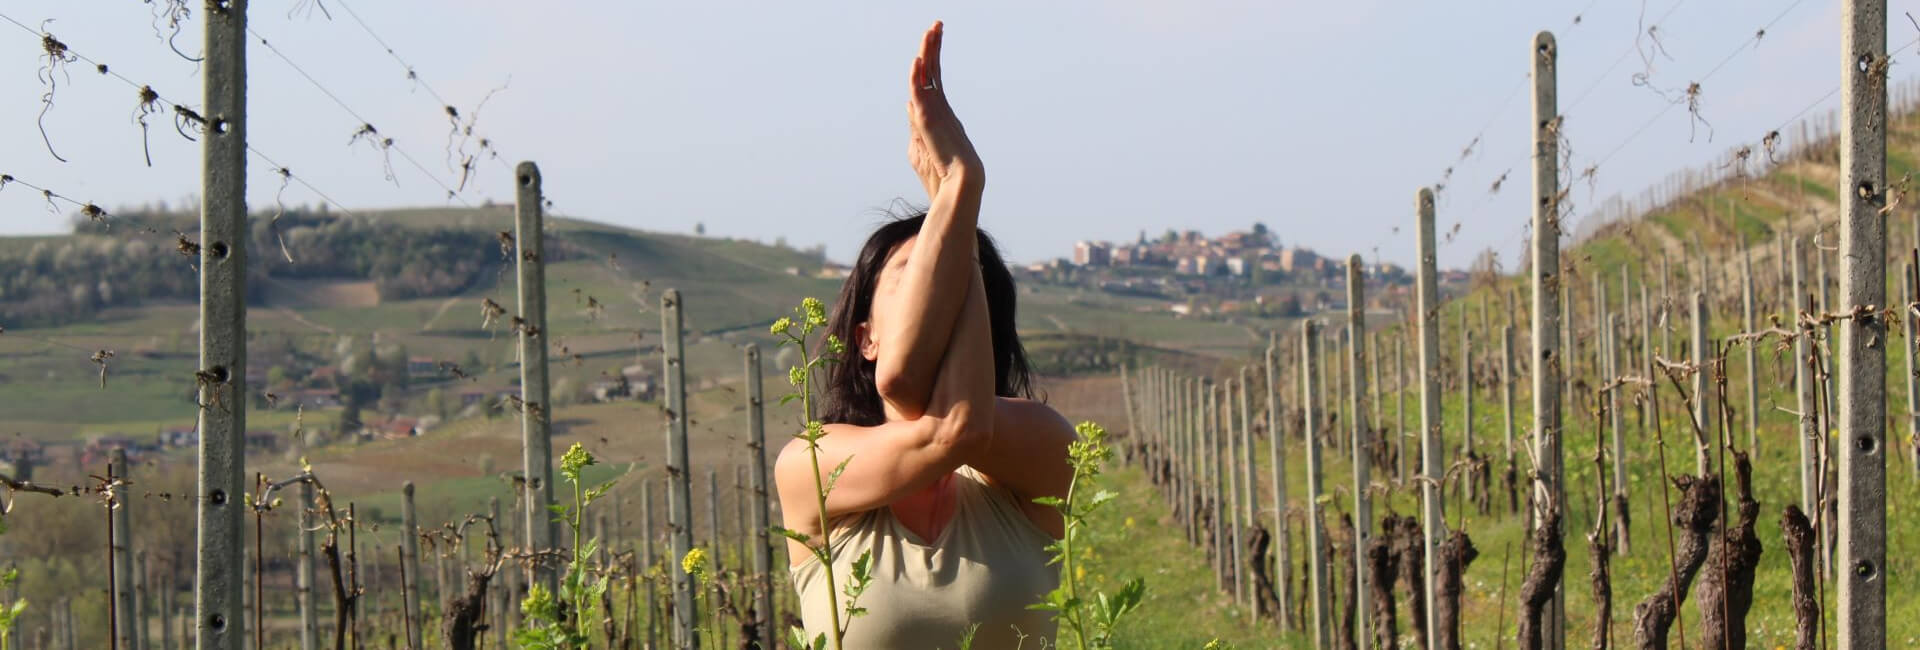 How Does Yoga in Vineyards Work?